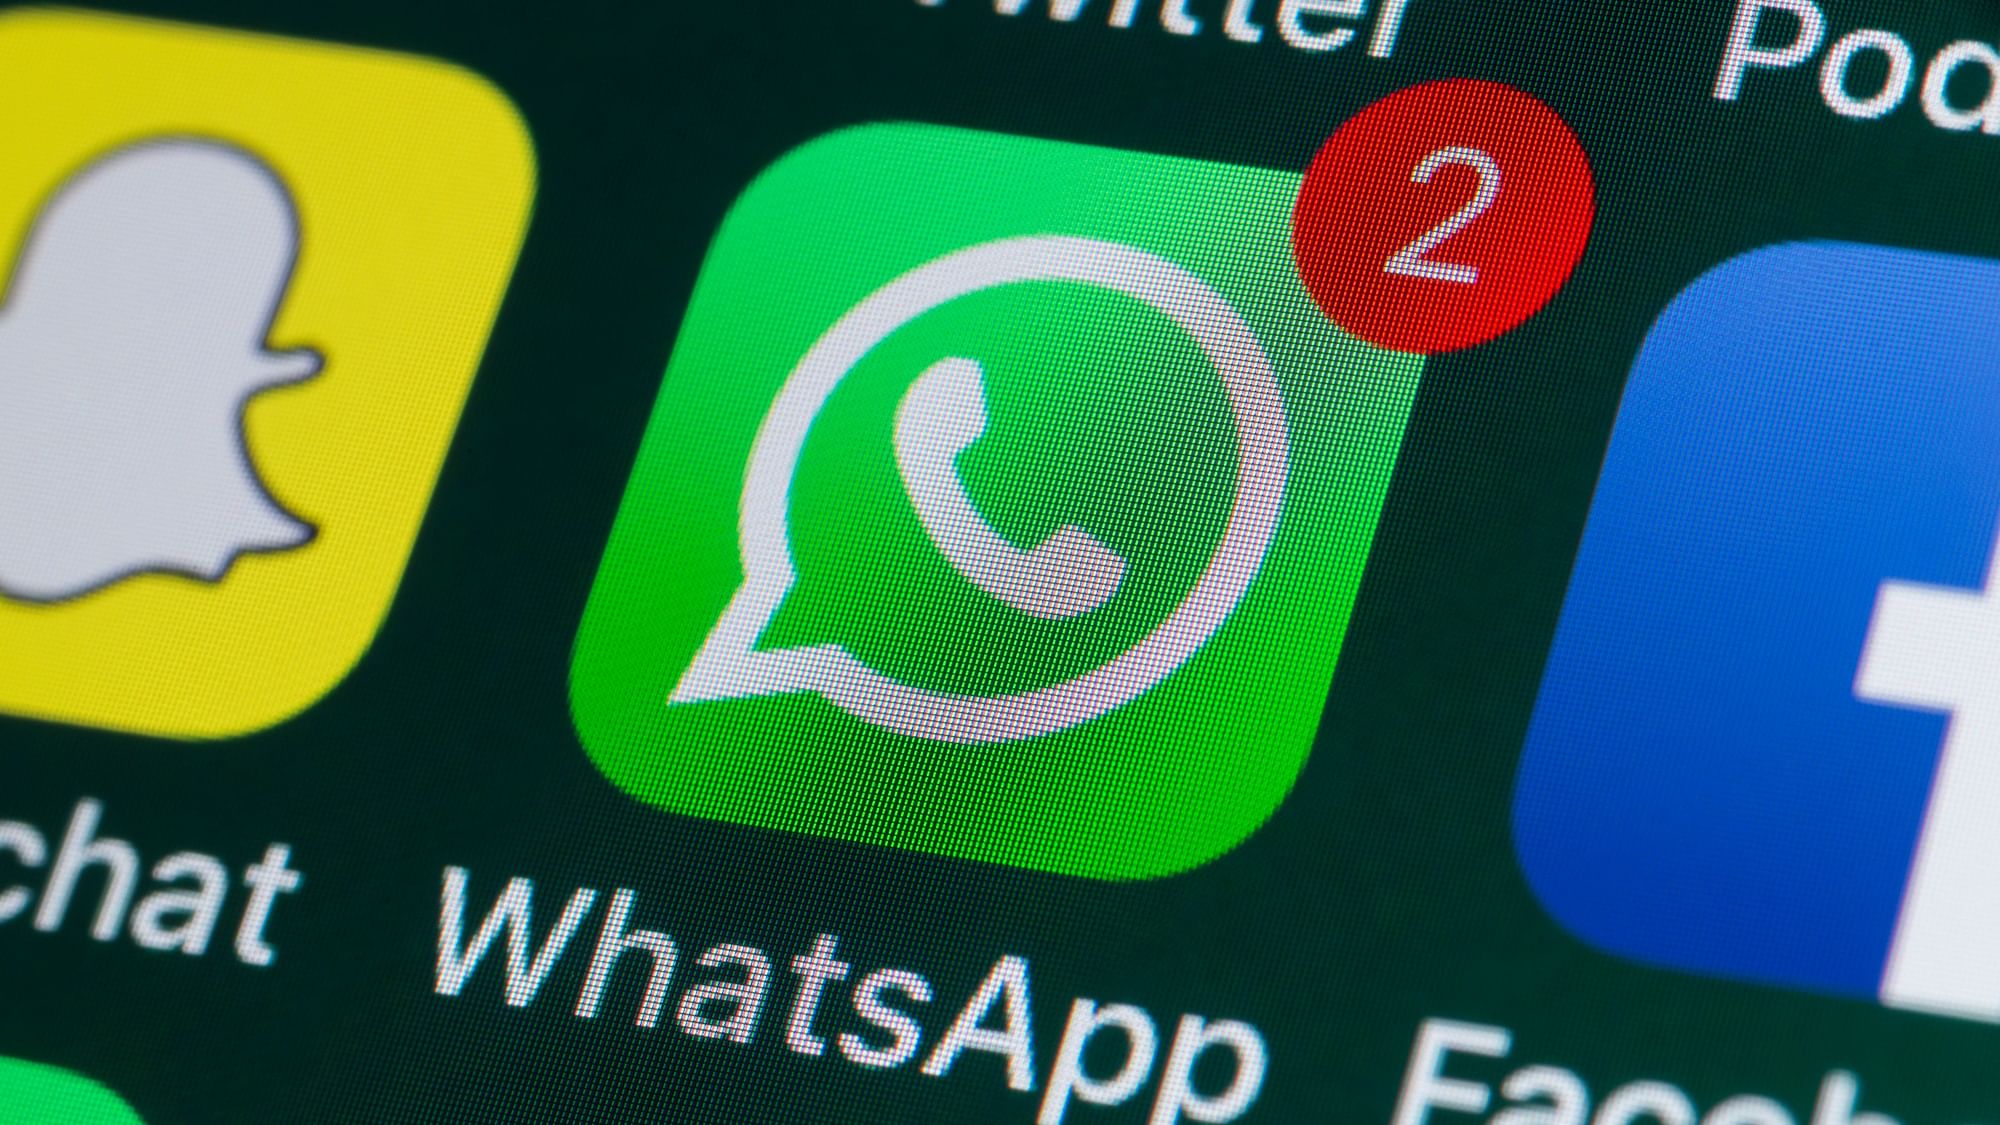 <div class="paragraphs"><p>View Past Participants feature to be rolled out soon by WhatsApp.</p></div>